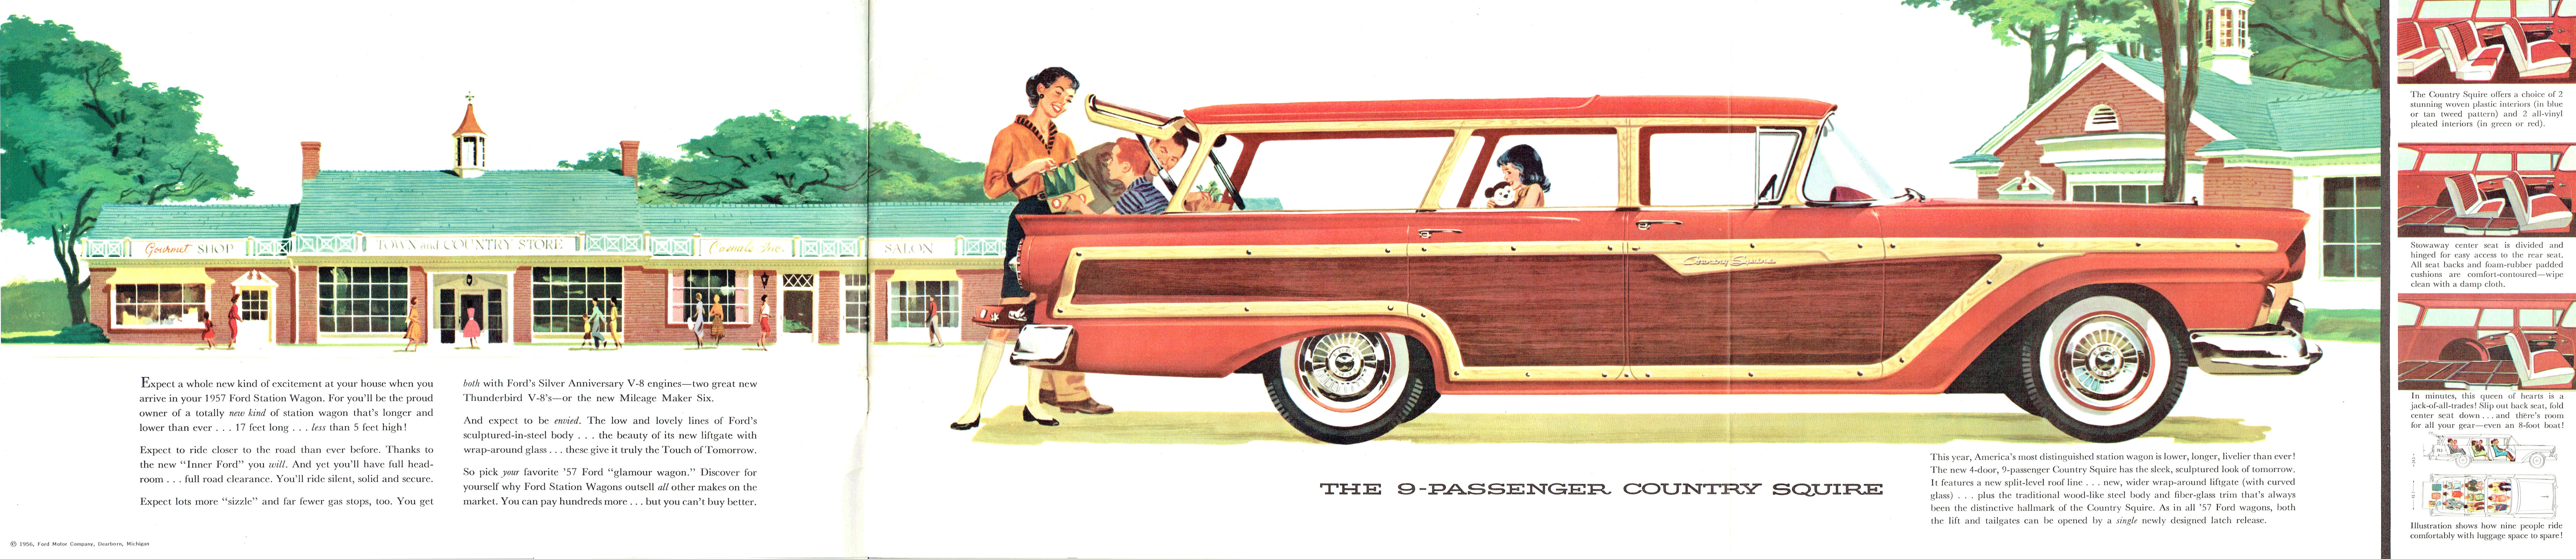 1957_Ford_Station_Wagons-02-03-04